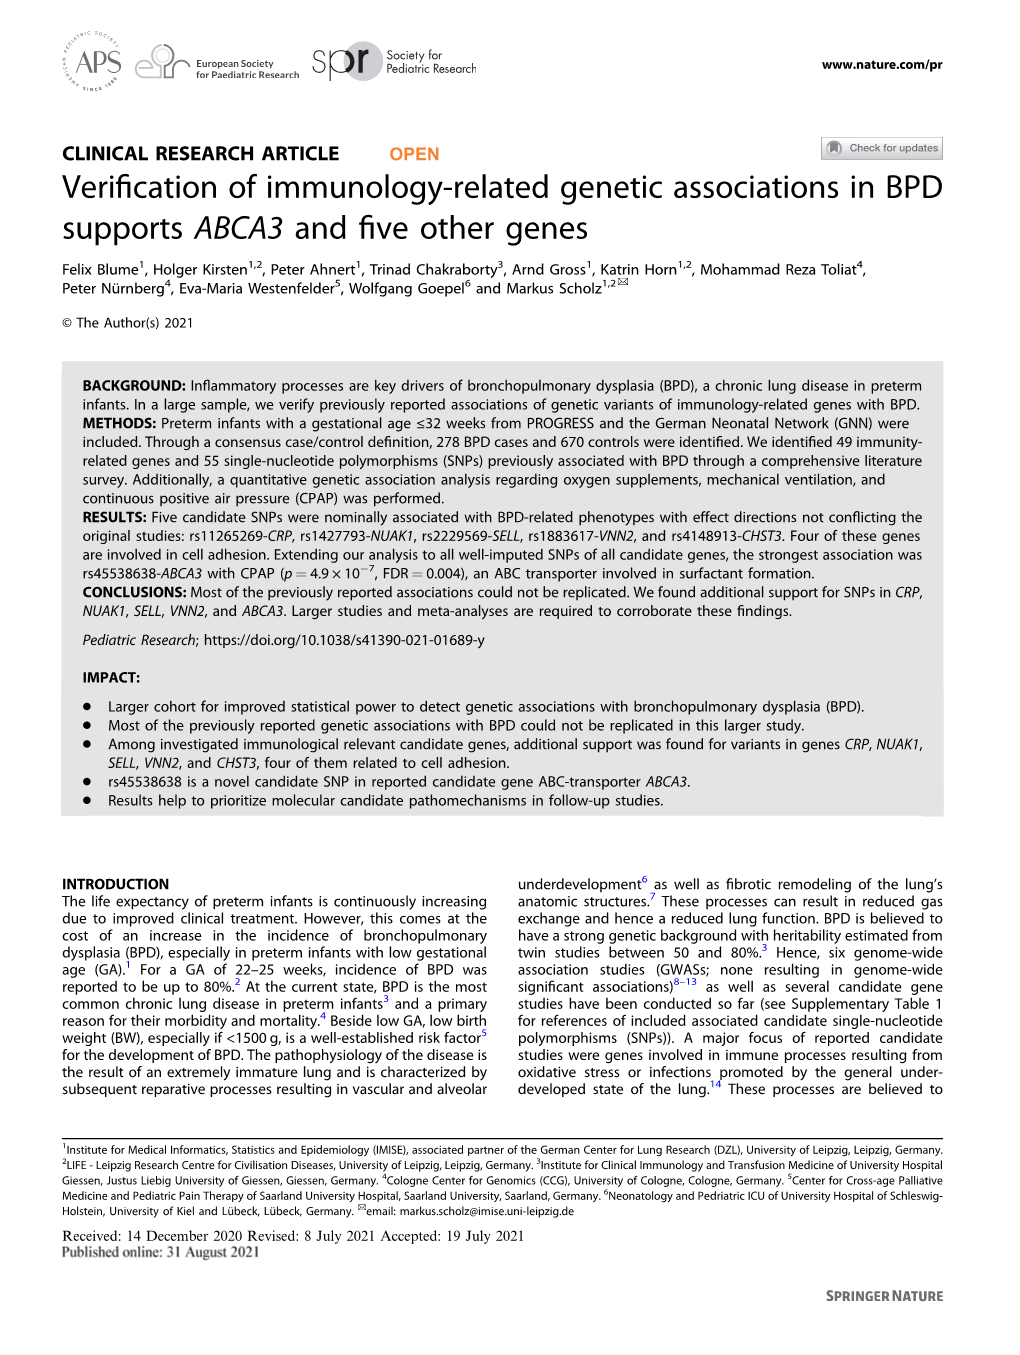 Verification of Immunology-Related Genetic Associations in BPD